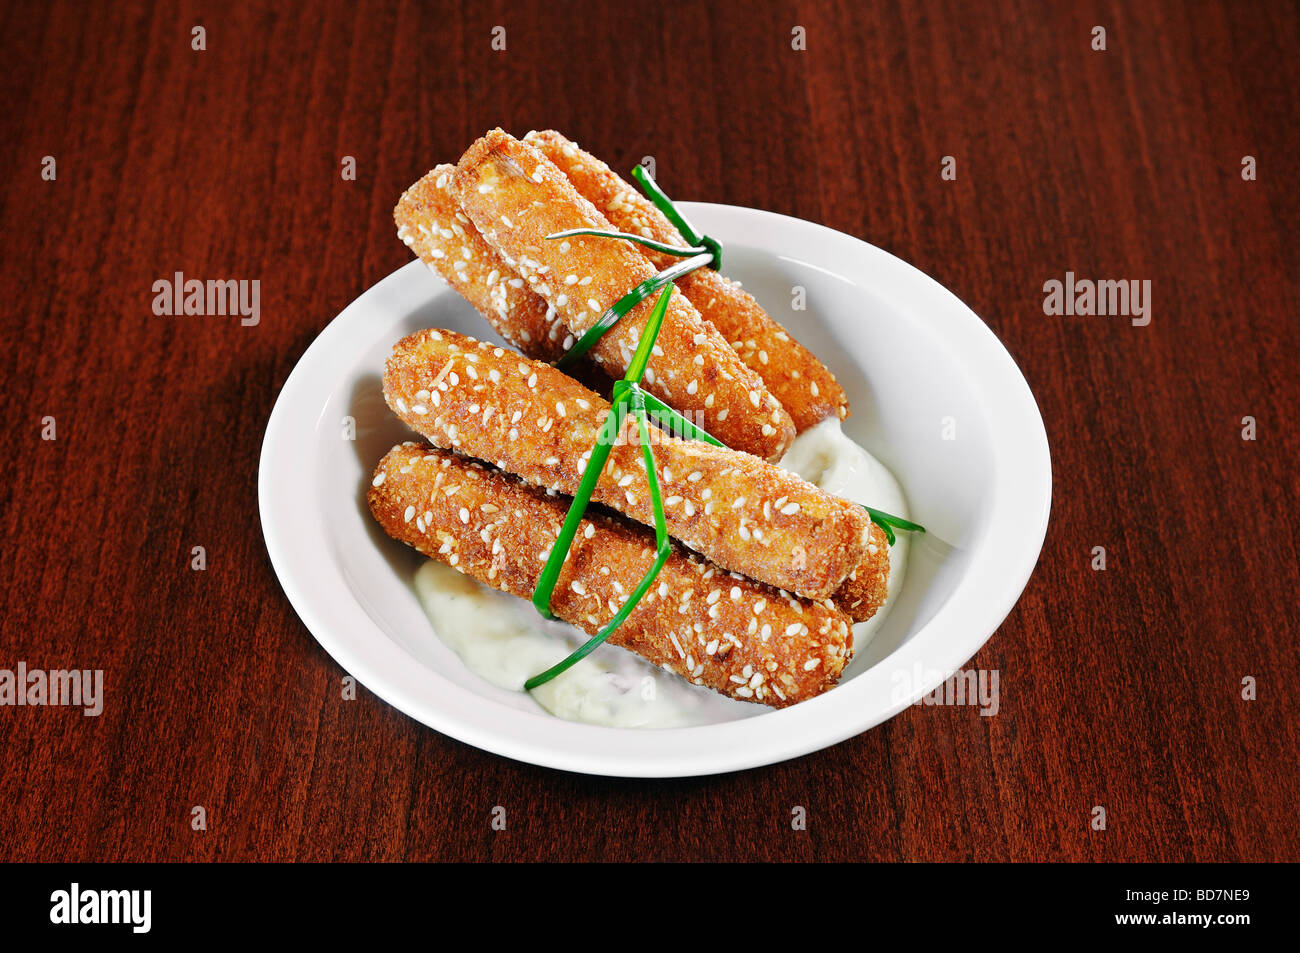 Vegetable Sticks with a Crispy Breadcrumb Coating Served with a Sour Cream and Mayonnaise Dip Stock Photo